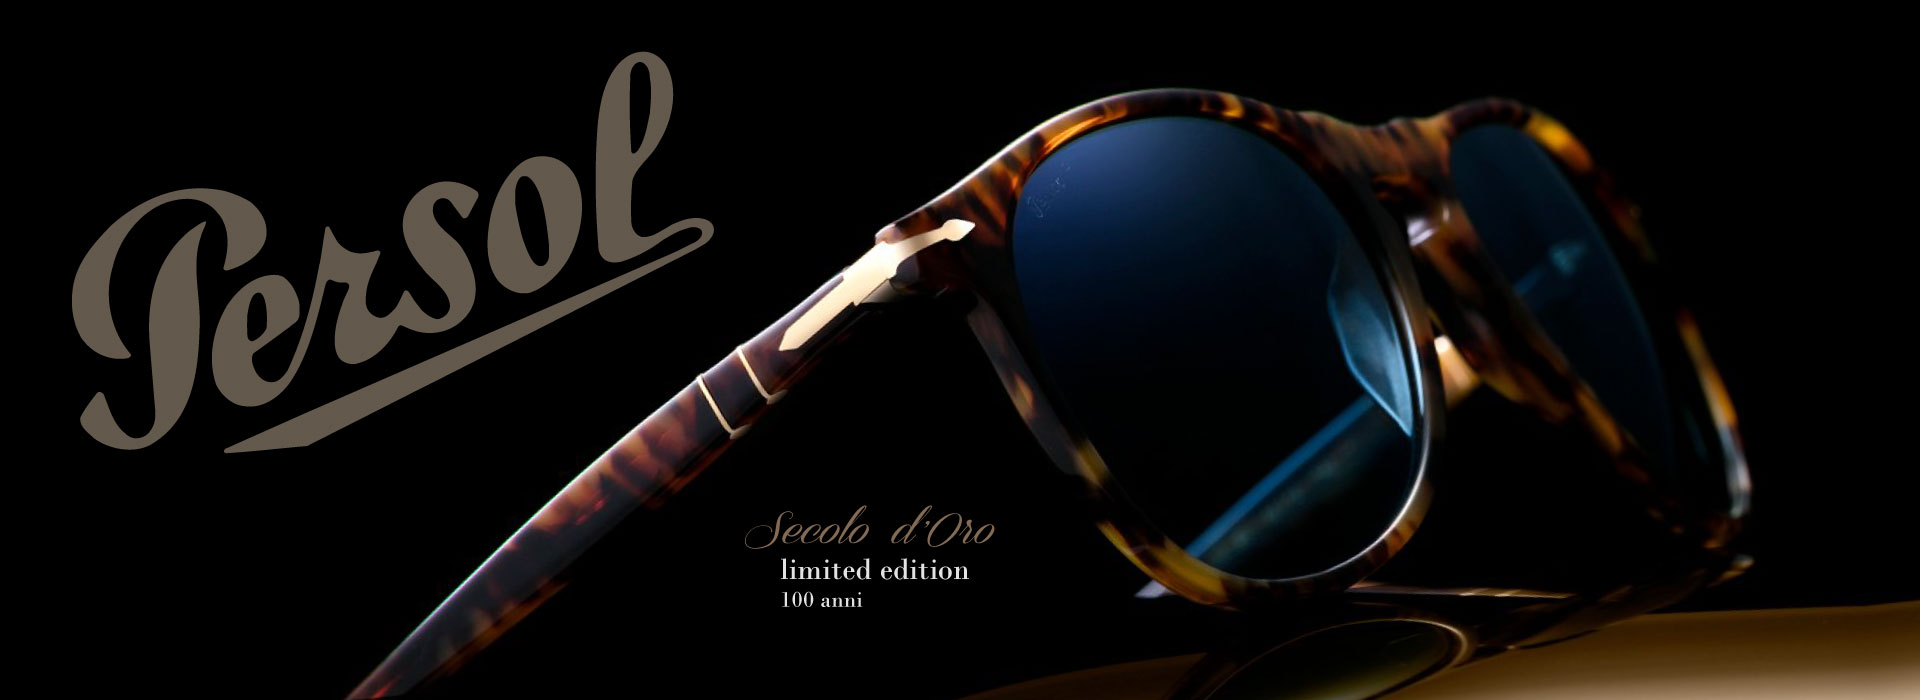 Persol Limited Edition